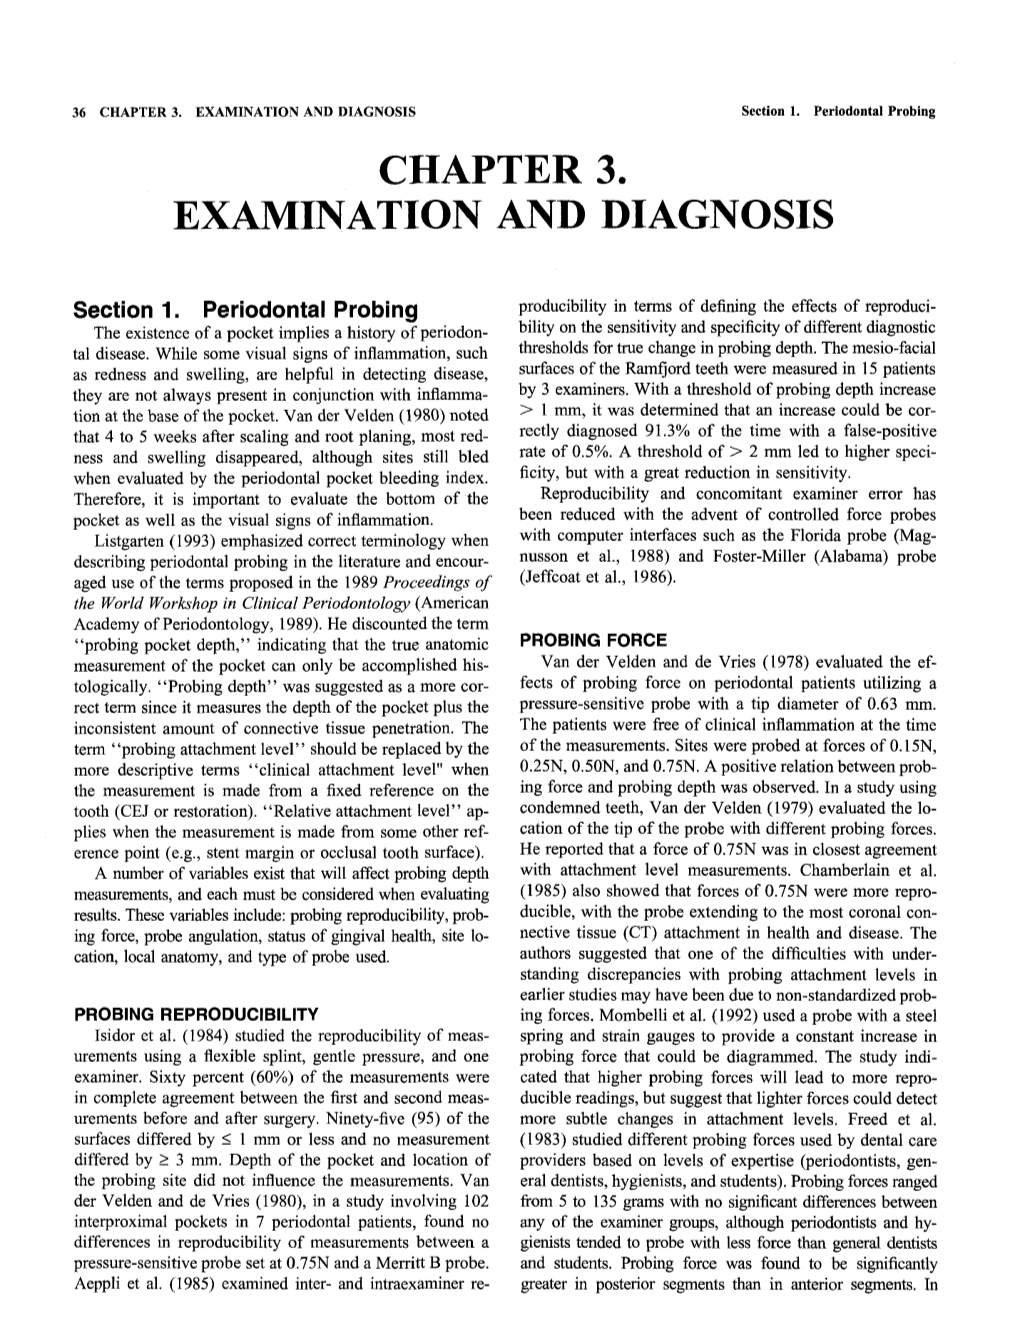 CHAPTER 3. EXAMINATION and DIAGNOSIS Section 1